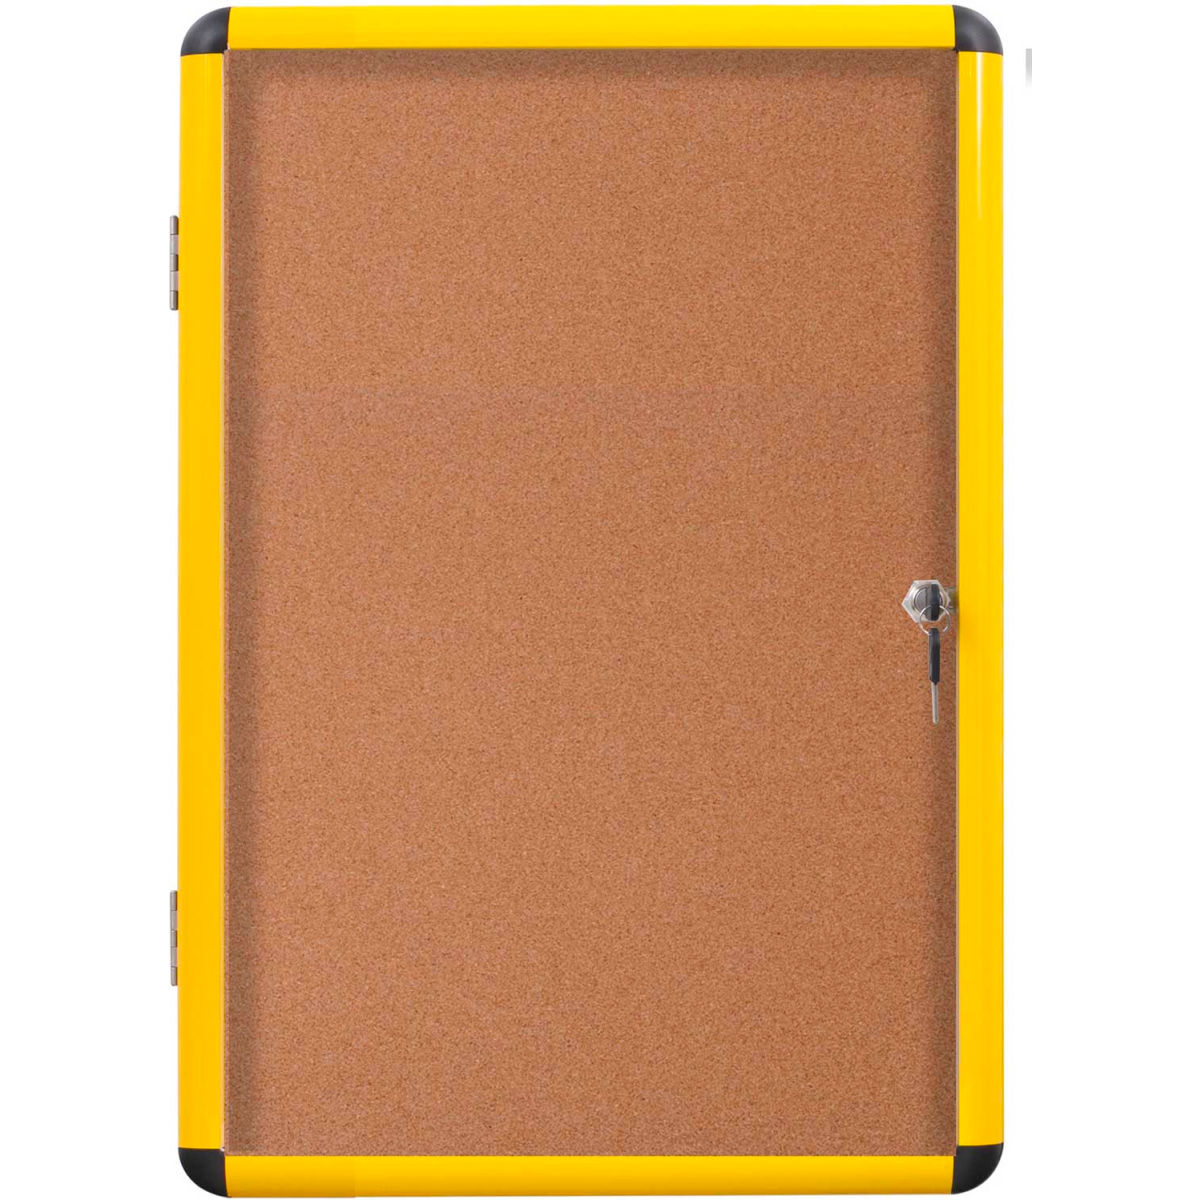 Bi-Silque Visual Communication Products B2213660 MasterVision Industrial Cork Bulletin Enclosed Board Cabinet with Single Swing Door - 47 x 38 in -  Bi-Silque Visual Communication Products Inc